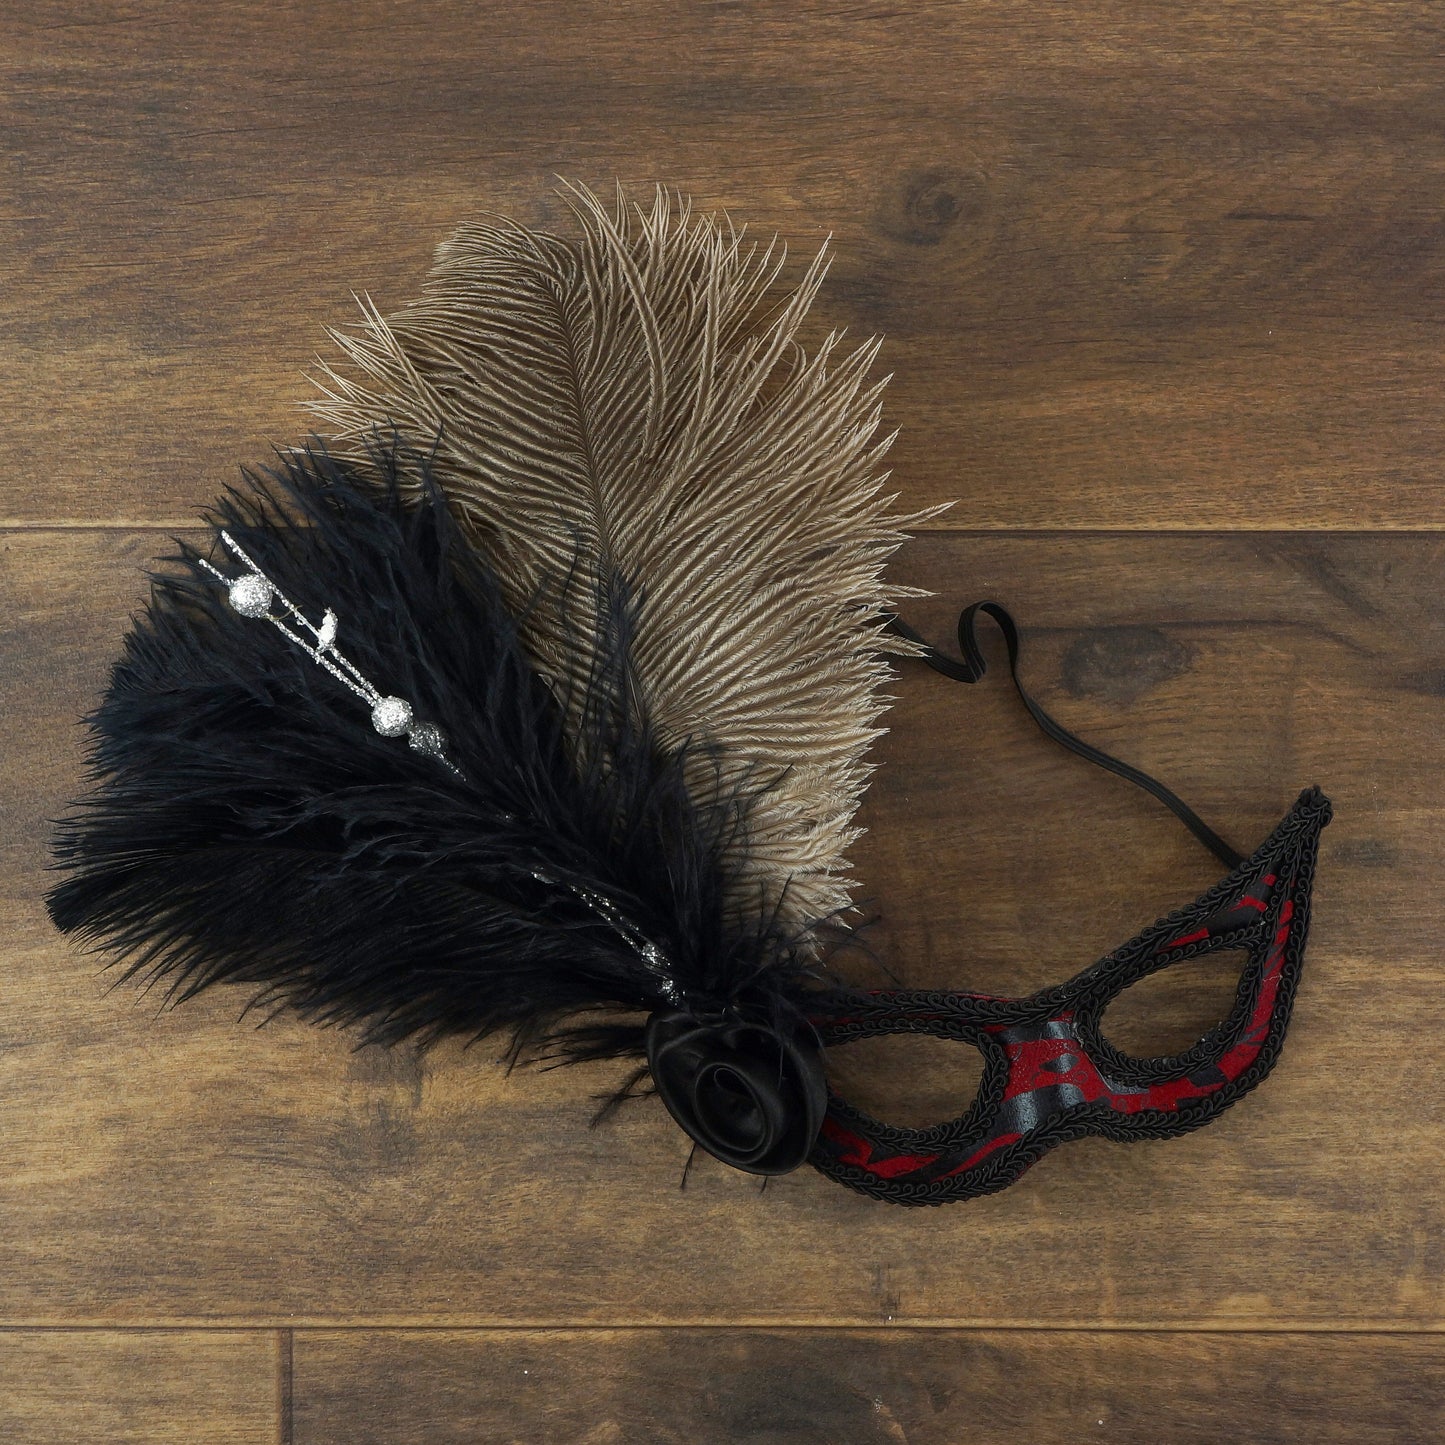 Ostrich Feathers 4-8" Drabs - Natural